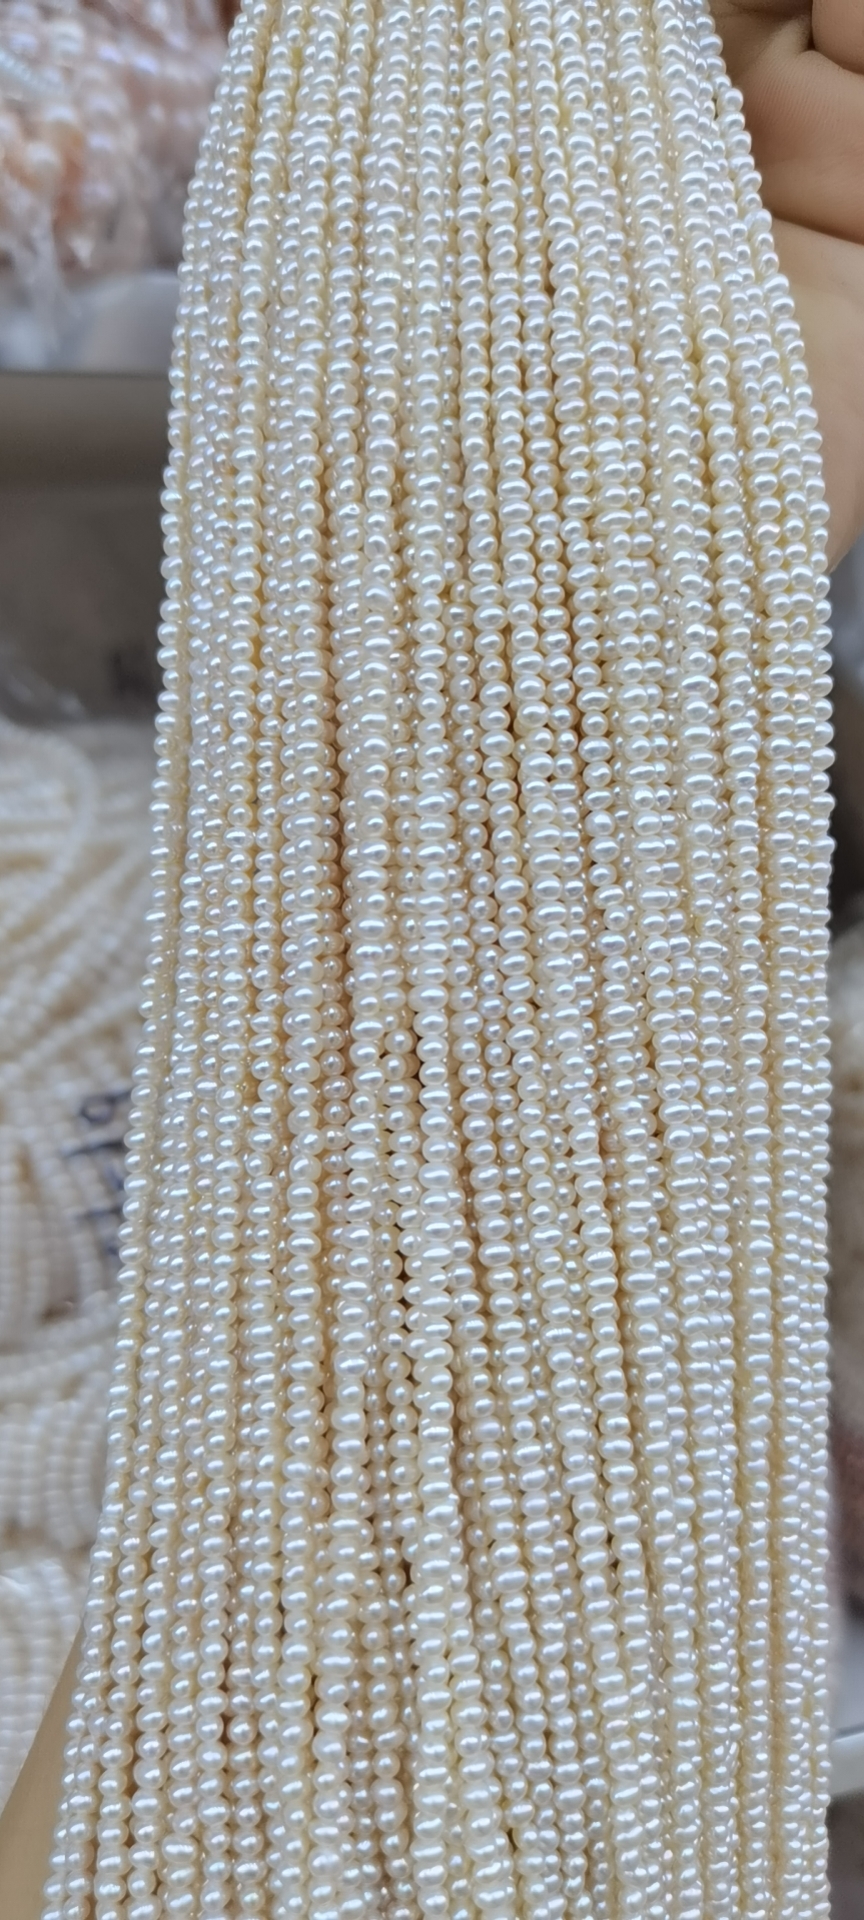 4-5 mm AA rice pearl side hole nature pearl loose Pearl suppliers and wholesale freshwater pearl with farm direct prices